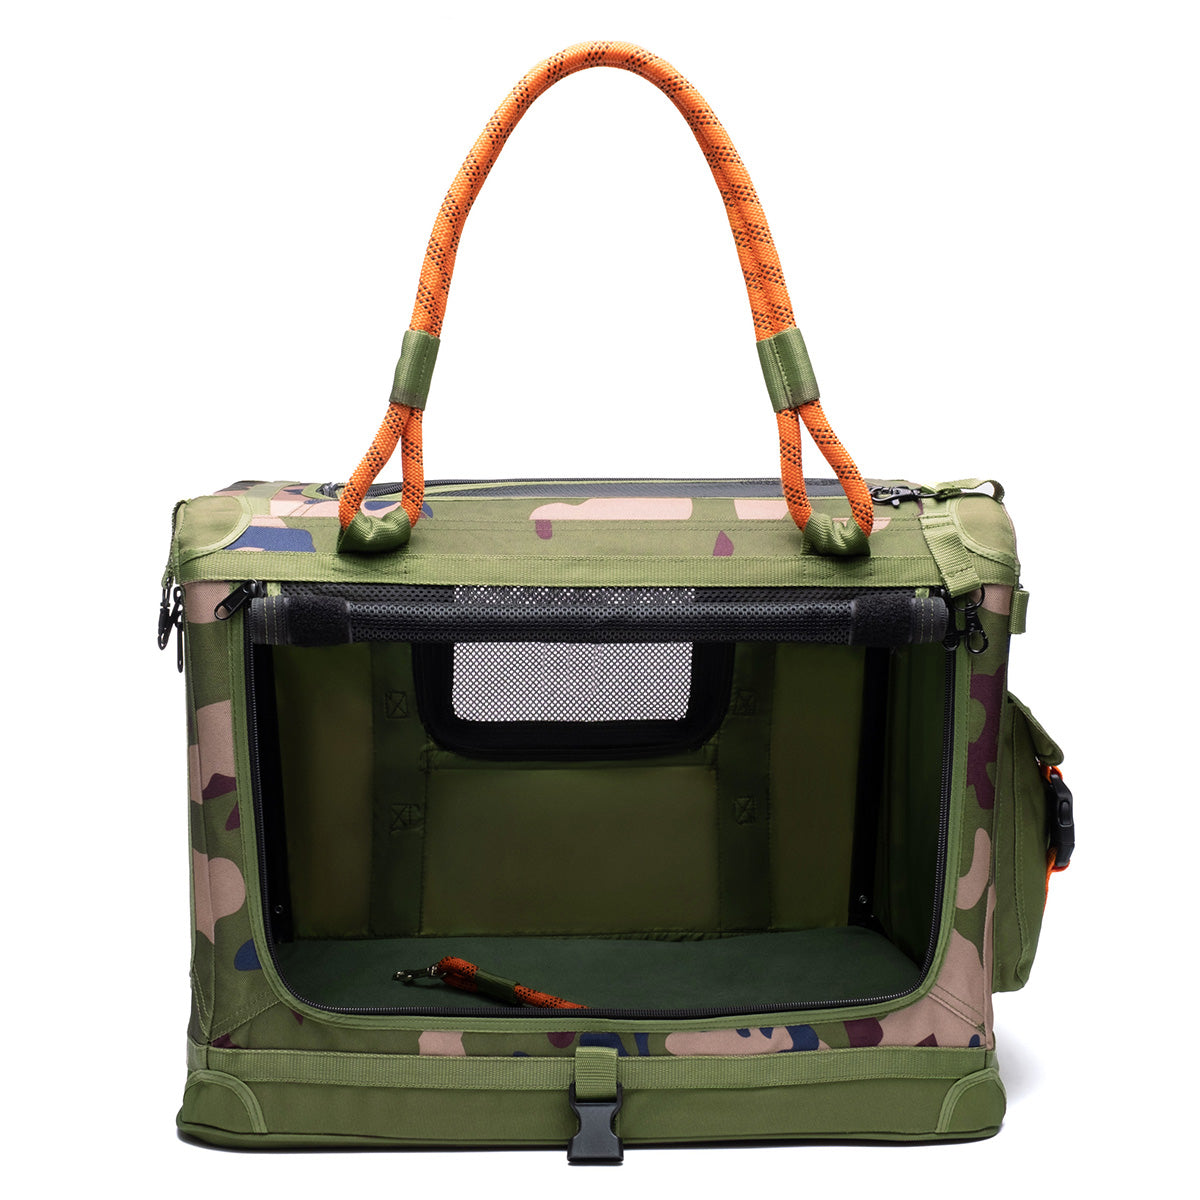 Designer Pet Carrier (Free Shipping) - CHIHUAHUA LAND AND MORE